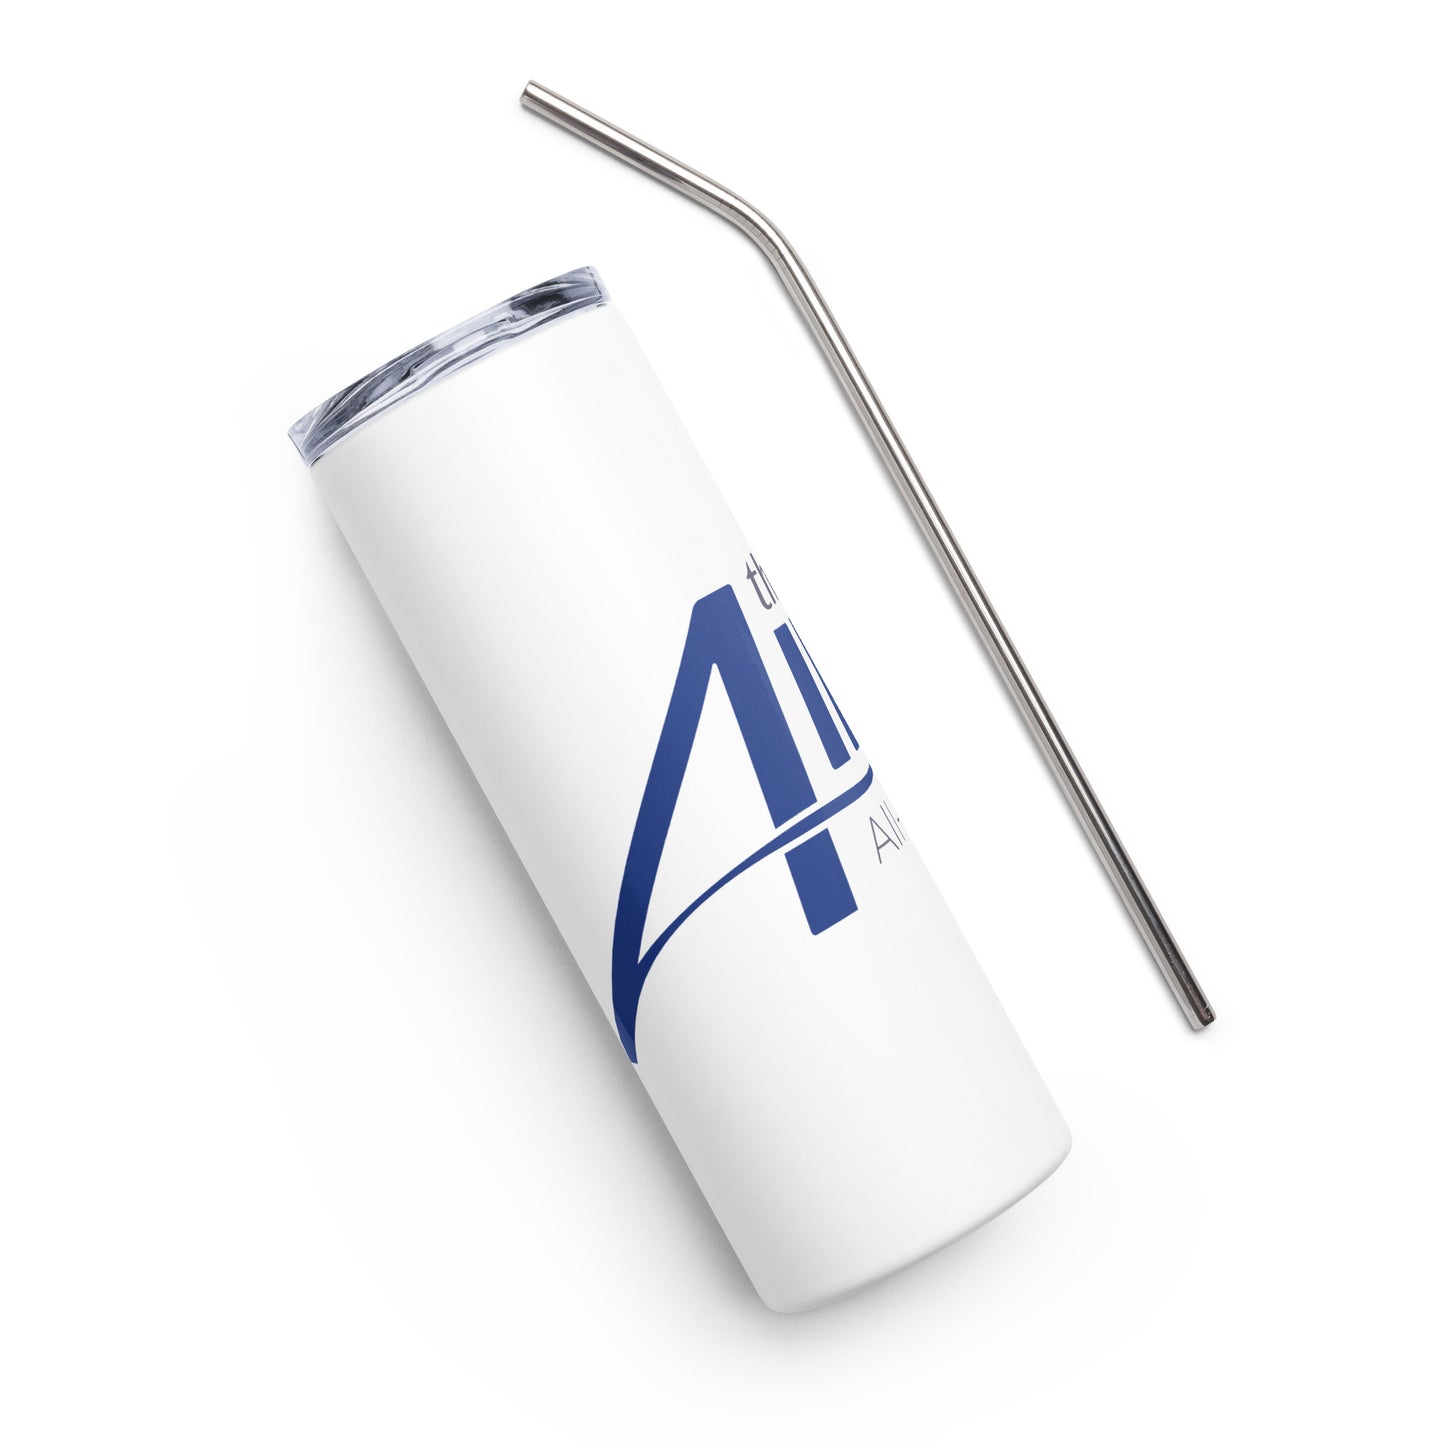 The Alliance - Printed Stainless steel tumbler